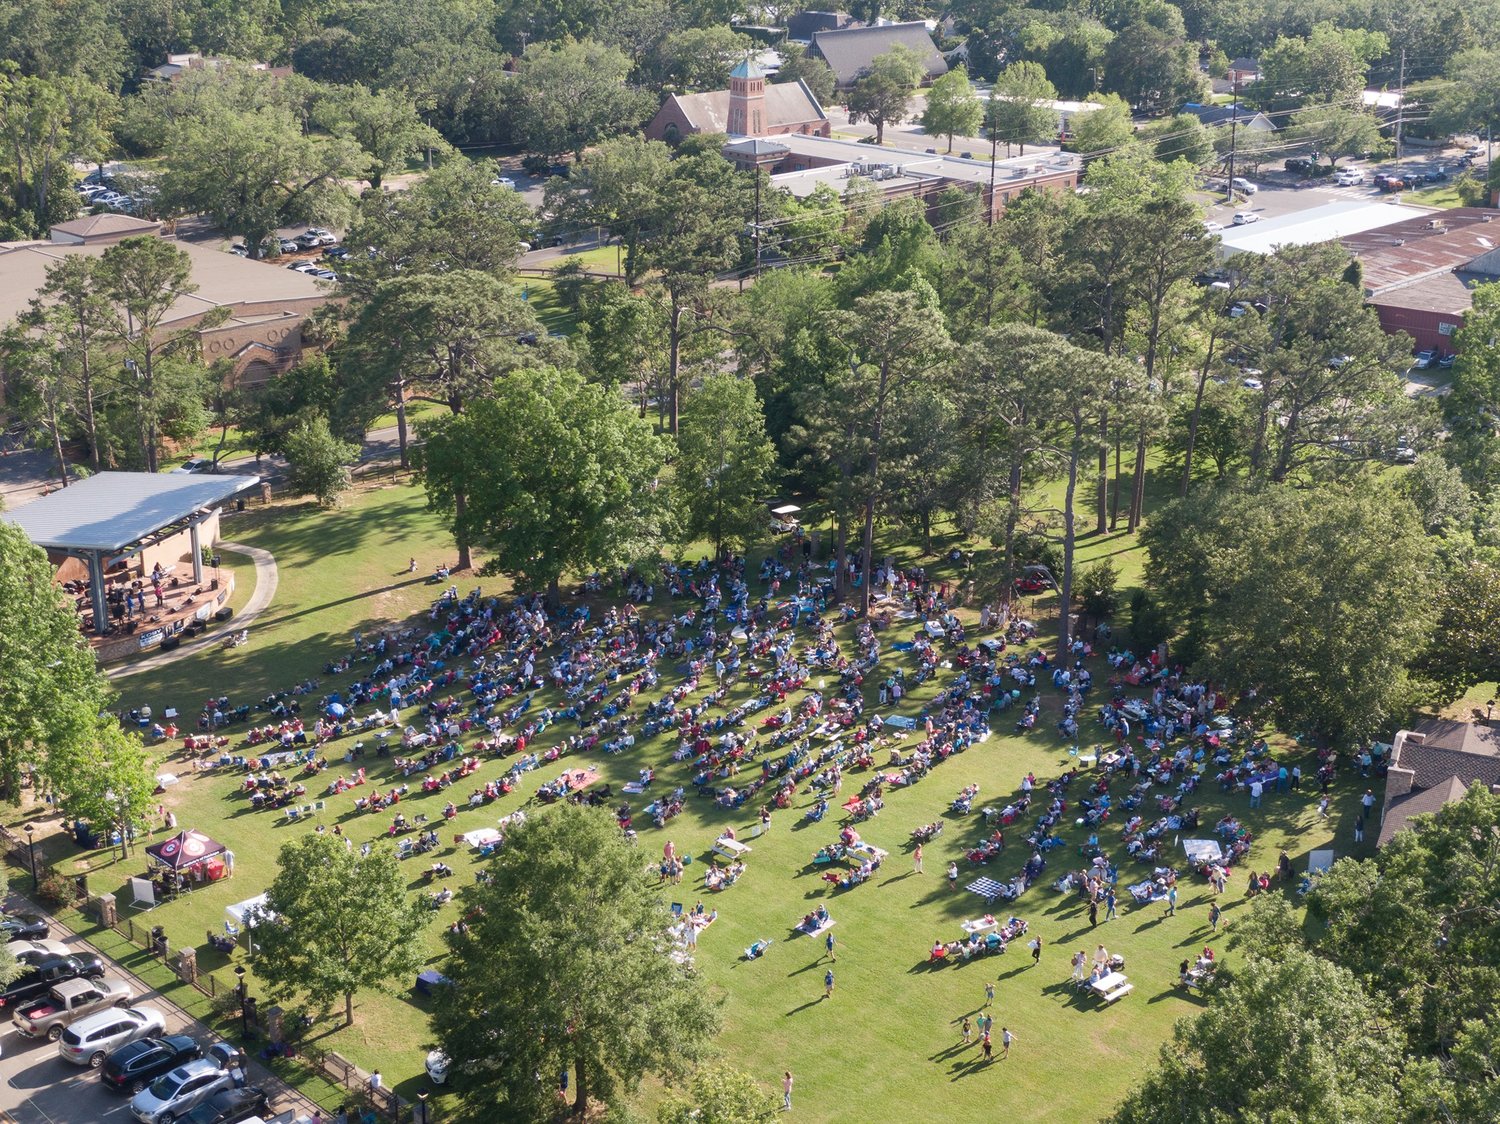 The Fall 2022 Live at Five Concert Series lineup is sure to please. Concerts take place at The Halstead Amphitheater located in downtown Fairhope on the campus of Coastal Alabama Community College.